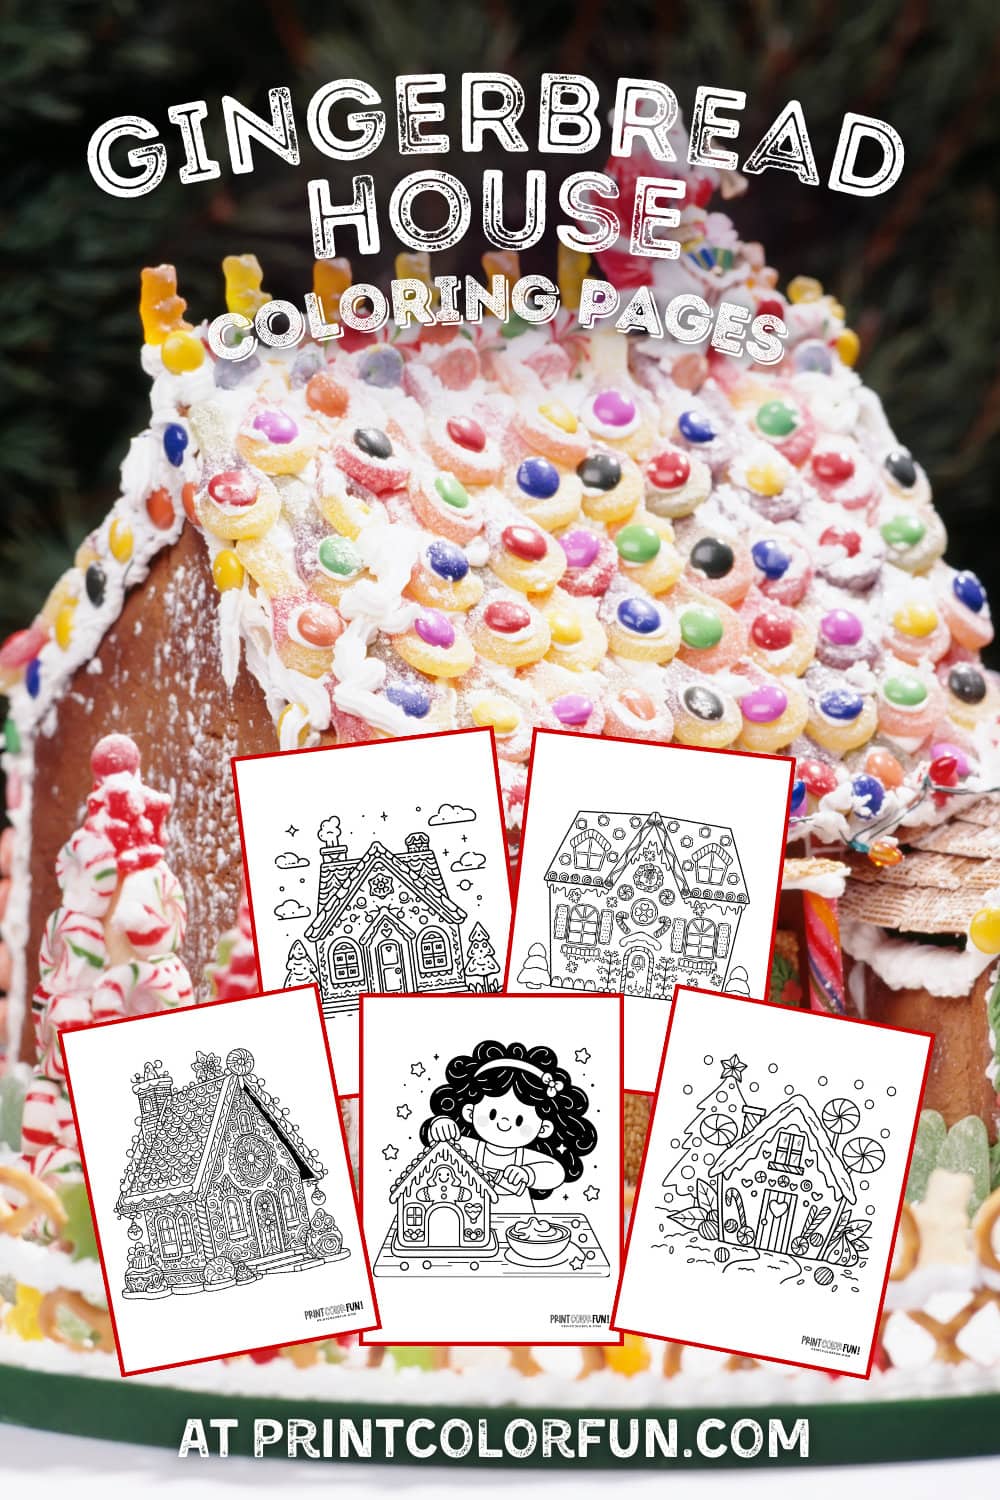 Gingerbread house holiday coloring pages and clipart - PrintColorFun com